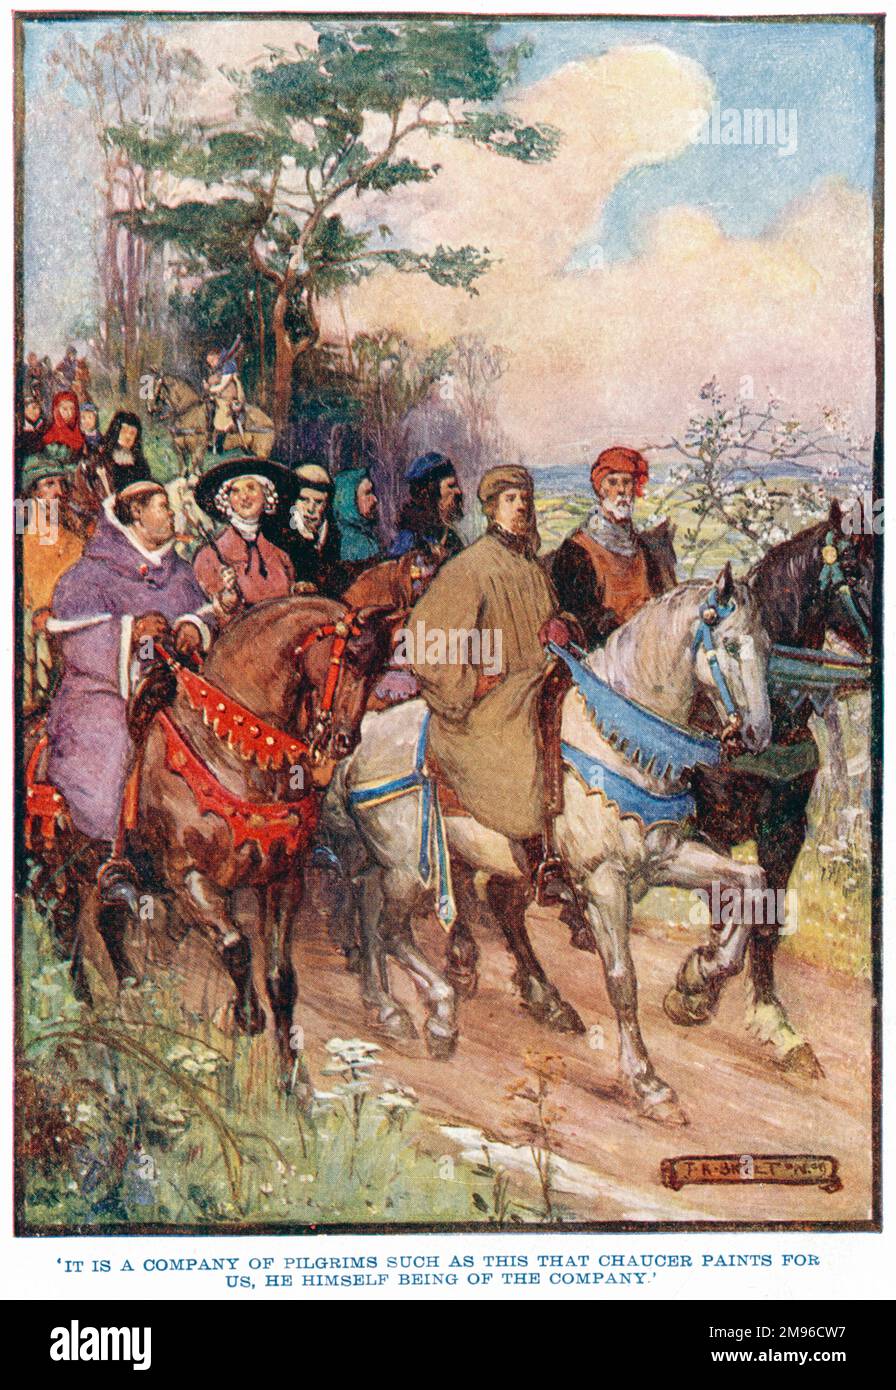 Chaucer's company of pilgrims on the road from Southwark to Canterbury, with Chaucer himself at the front of the group. Stock Photo